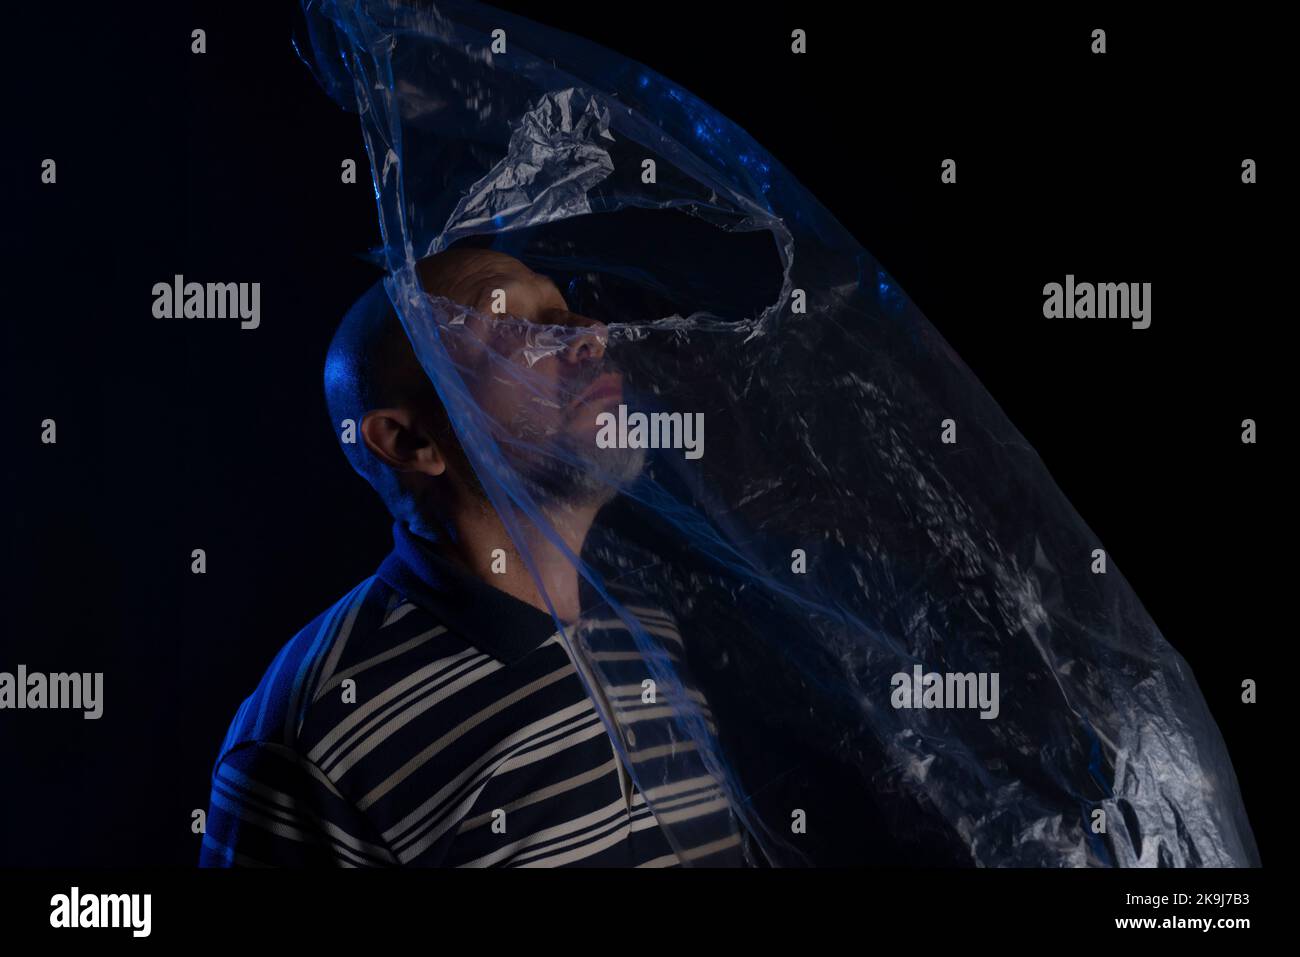 Mature man with a transparent plastic blue bag flying over his head and face. suffocate. face in a plastic bag, strangulation Stock Photo